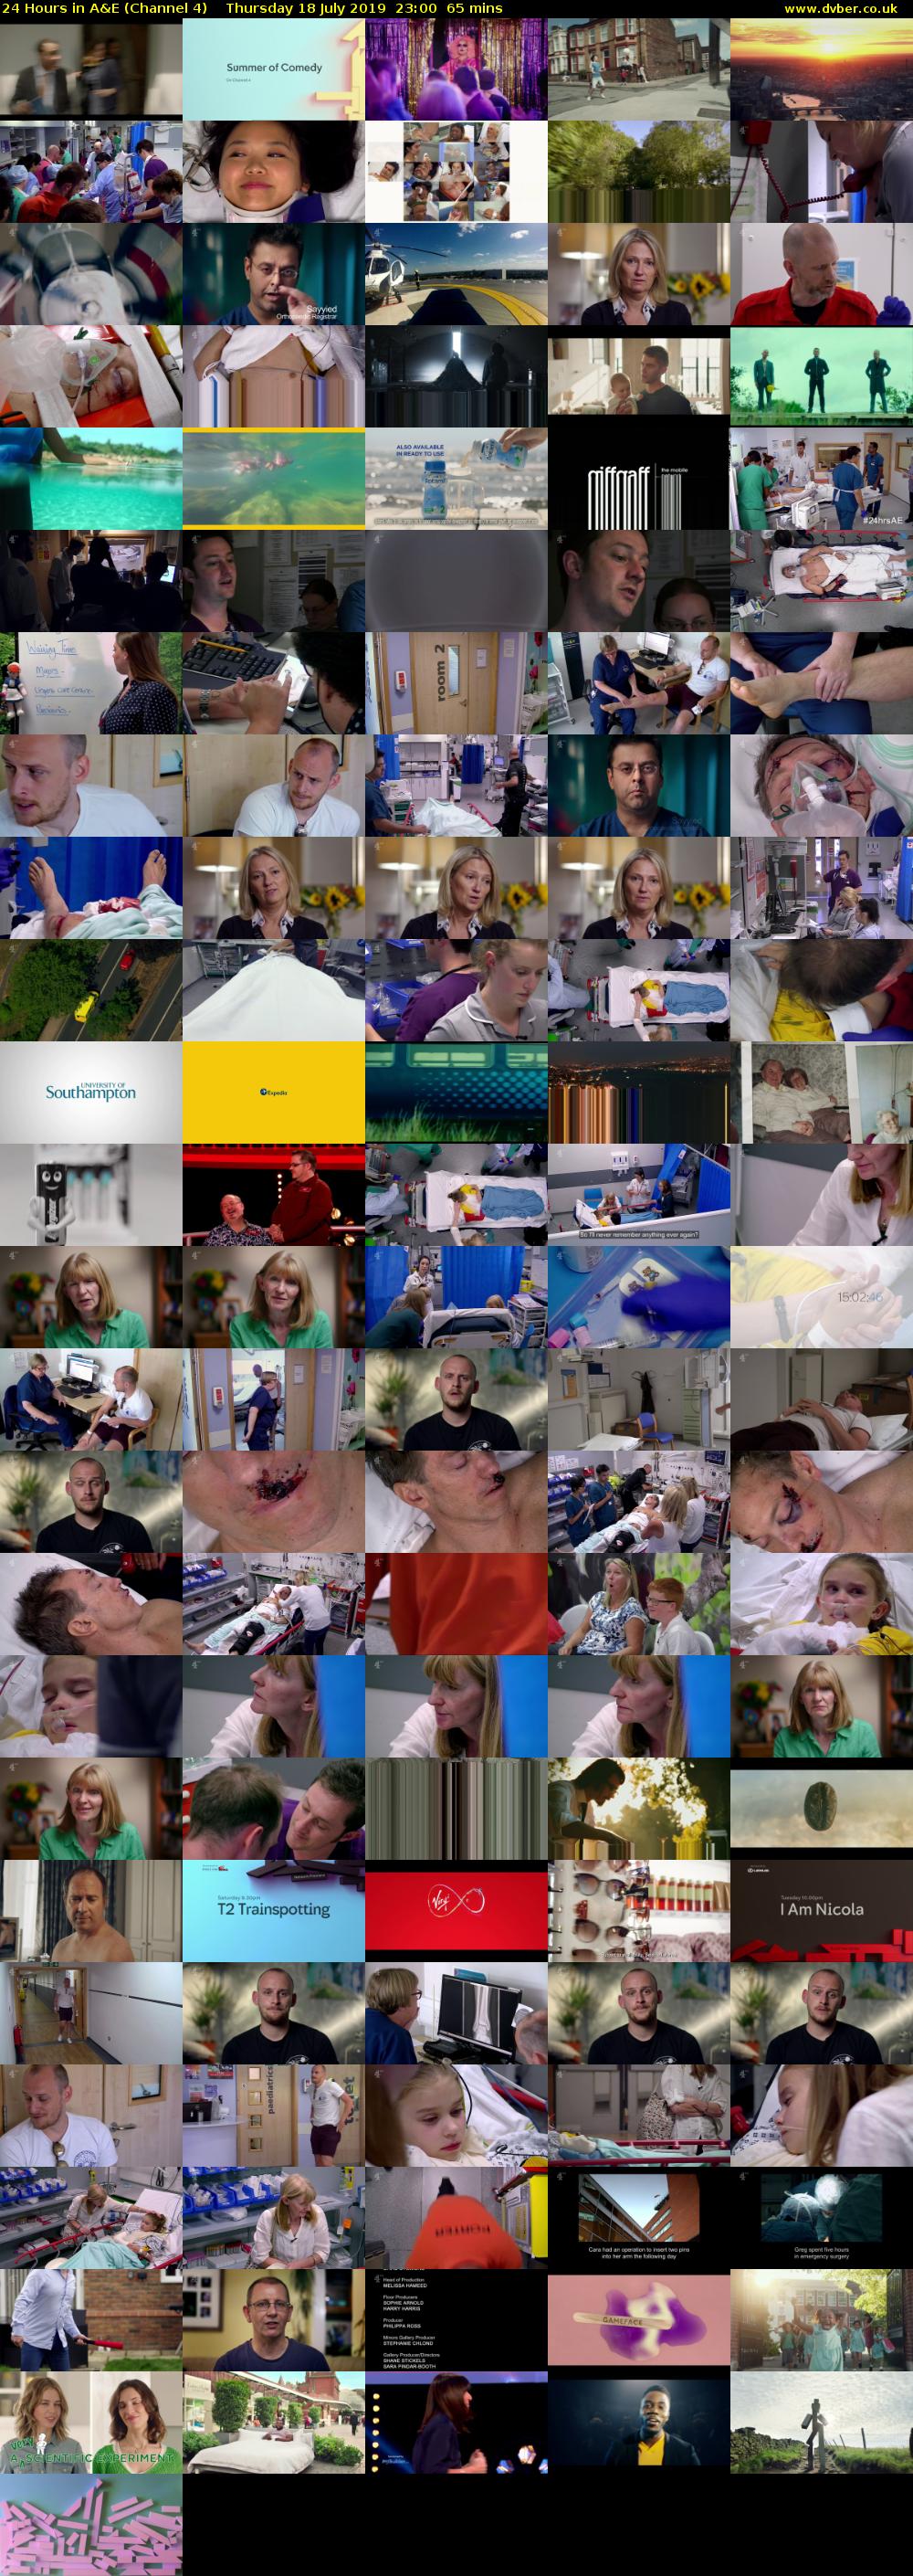 24 Hours in A&E (Channel 4) Thursday 18 July 2019 23:00 - 00:05